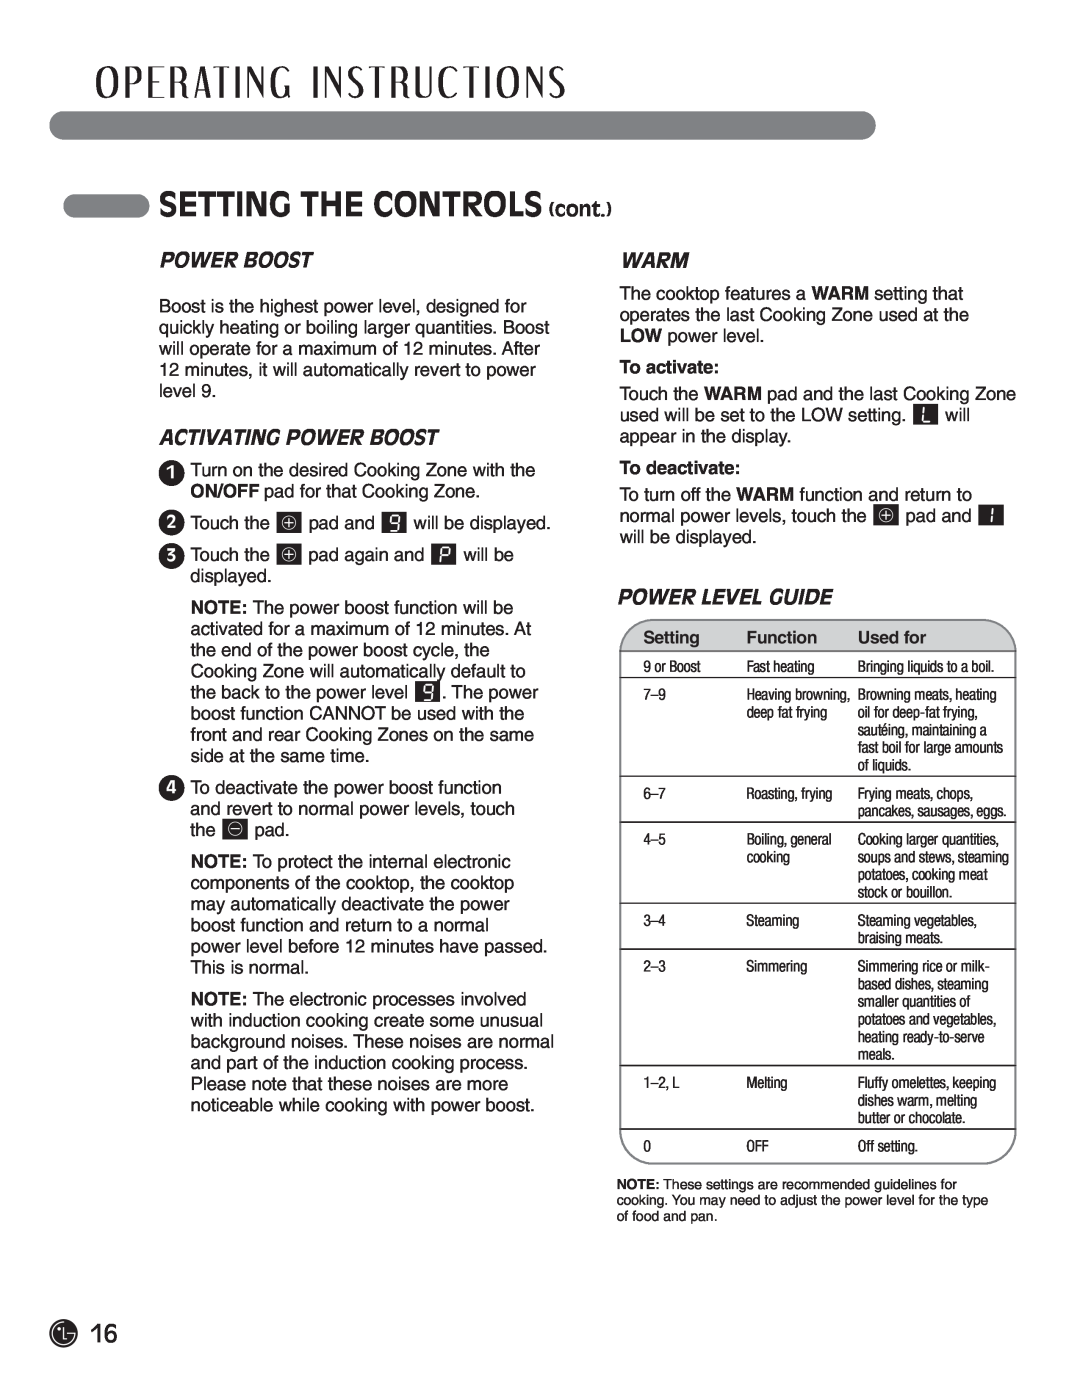 LG Electronics LCE30845 SETTING THE CONTROLS cont, Activating Power Boost, Warm, Power Level Guide, To activate 